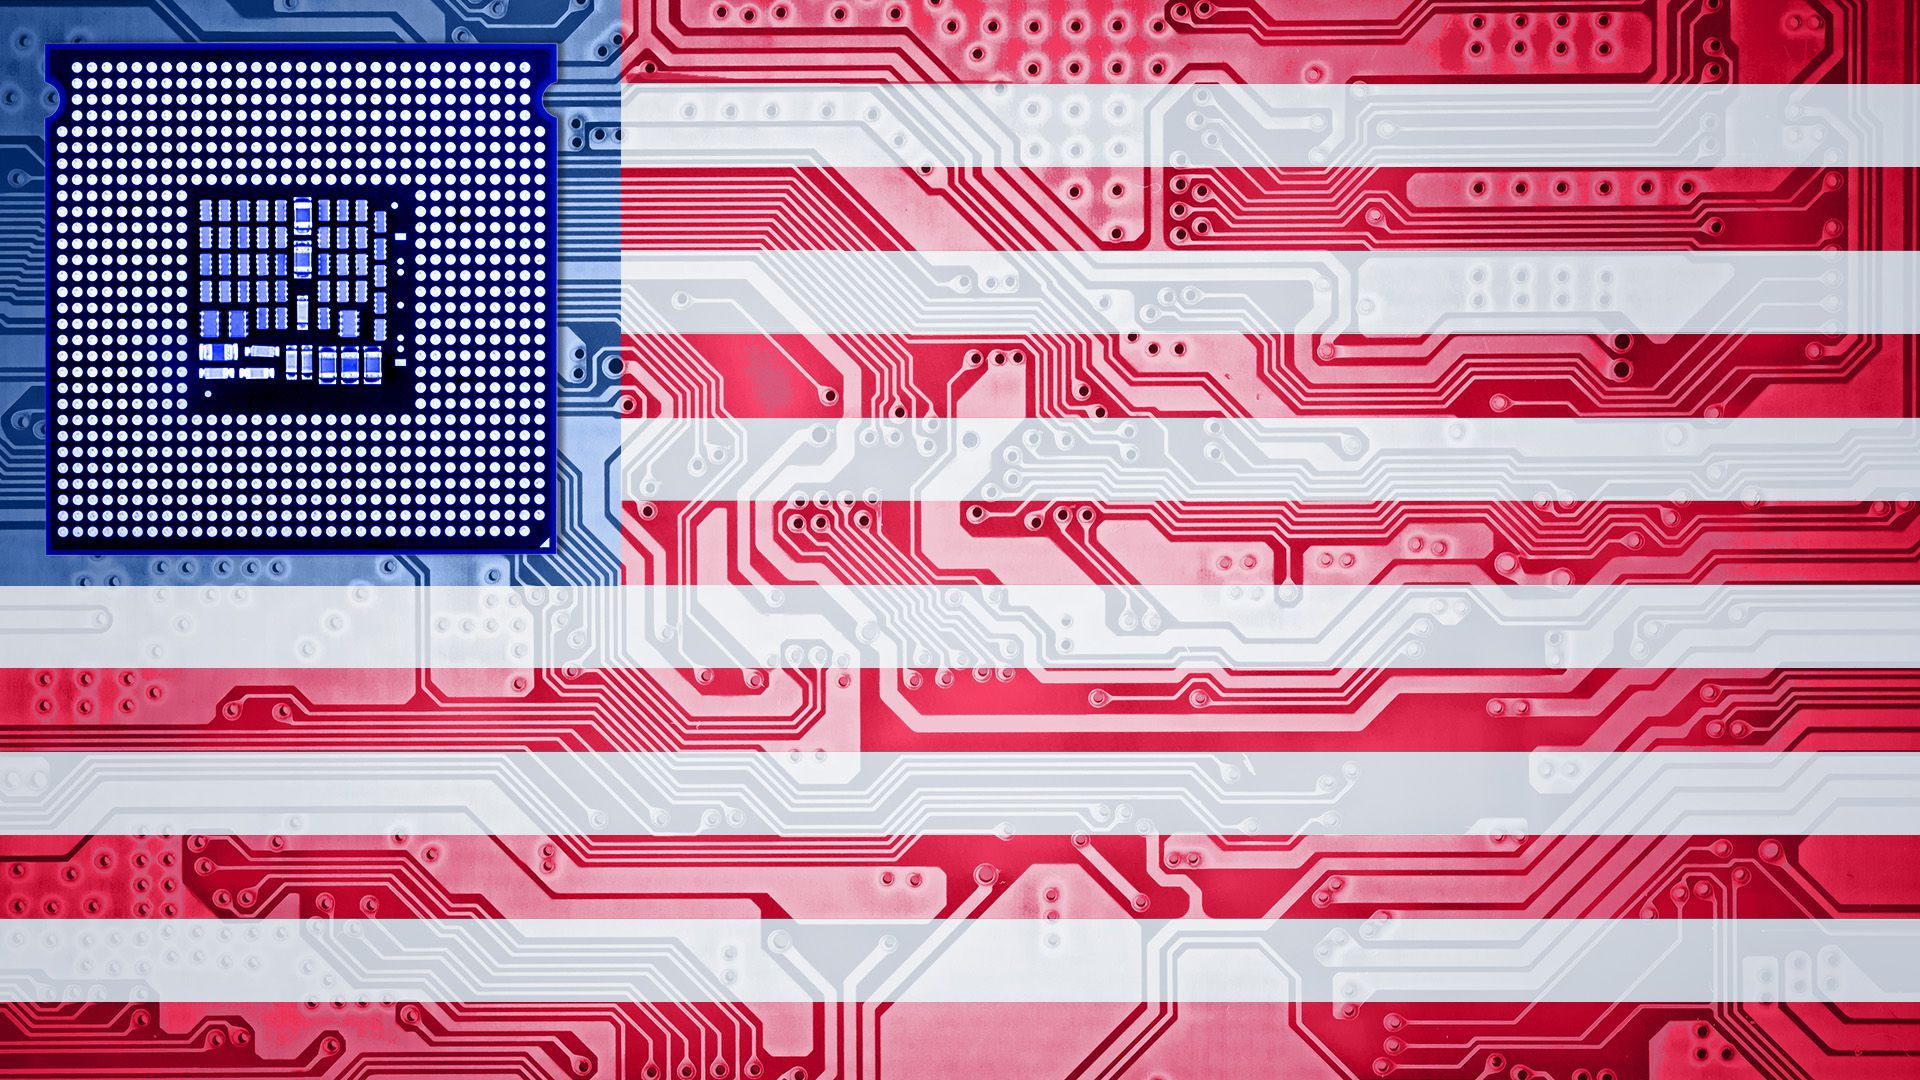 Illustration of a US flag made of semiconductor chips.